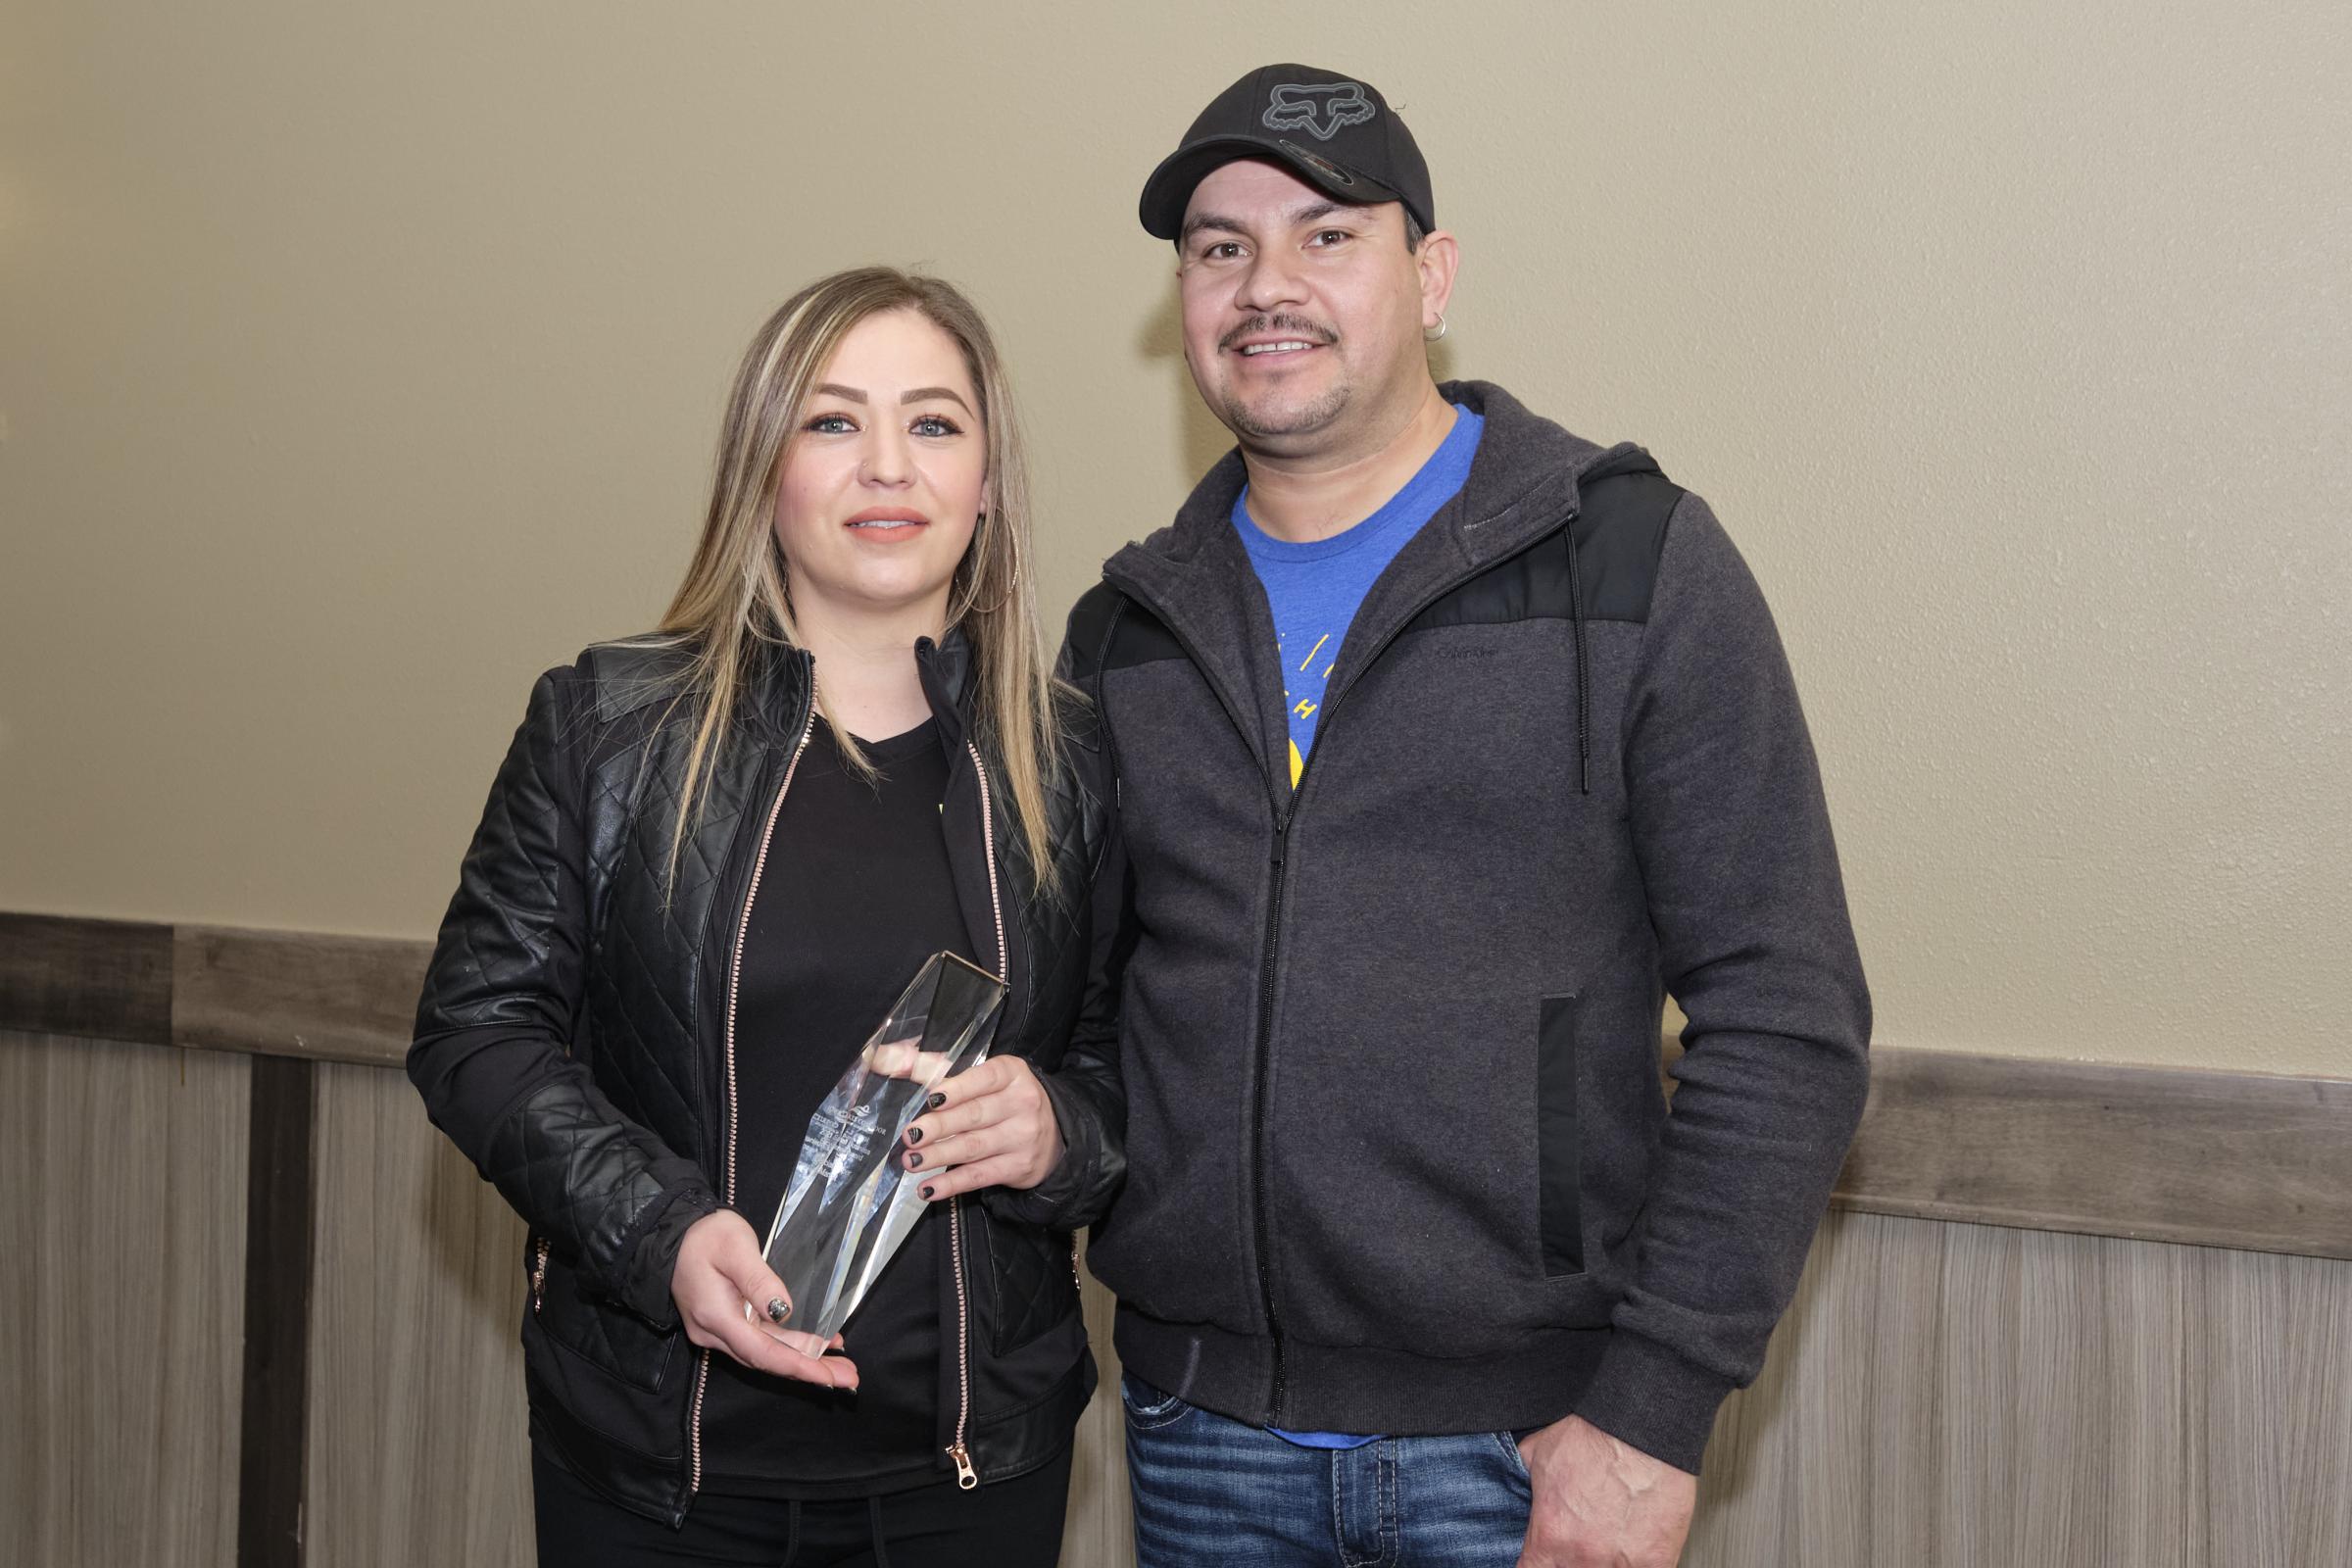 2021 Small Business of the Year: Delicias Super Market - Pictured: Diego & Ana Diaz